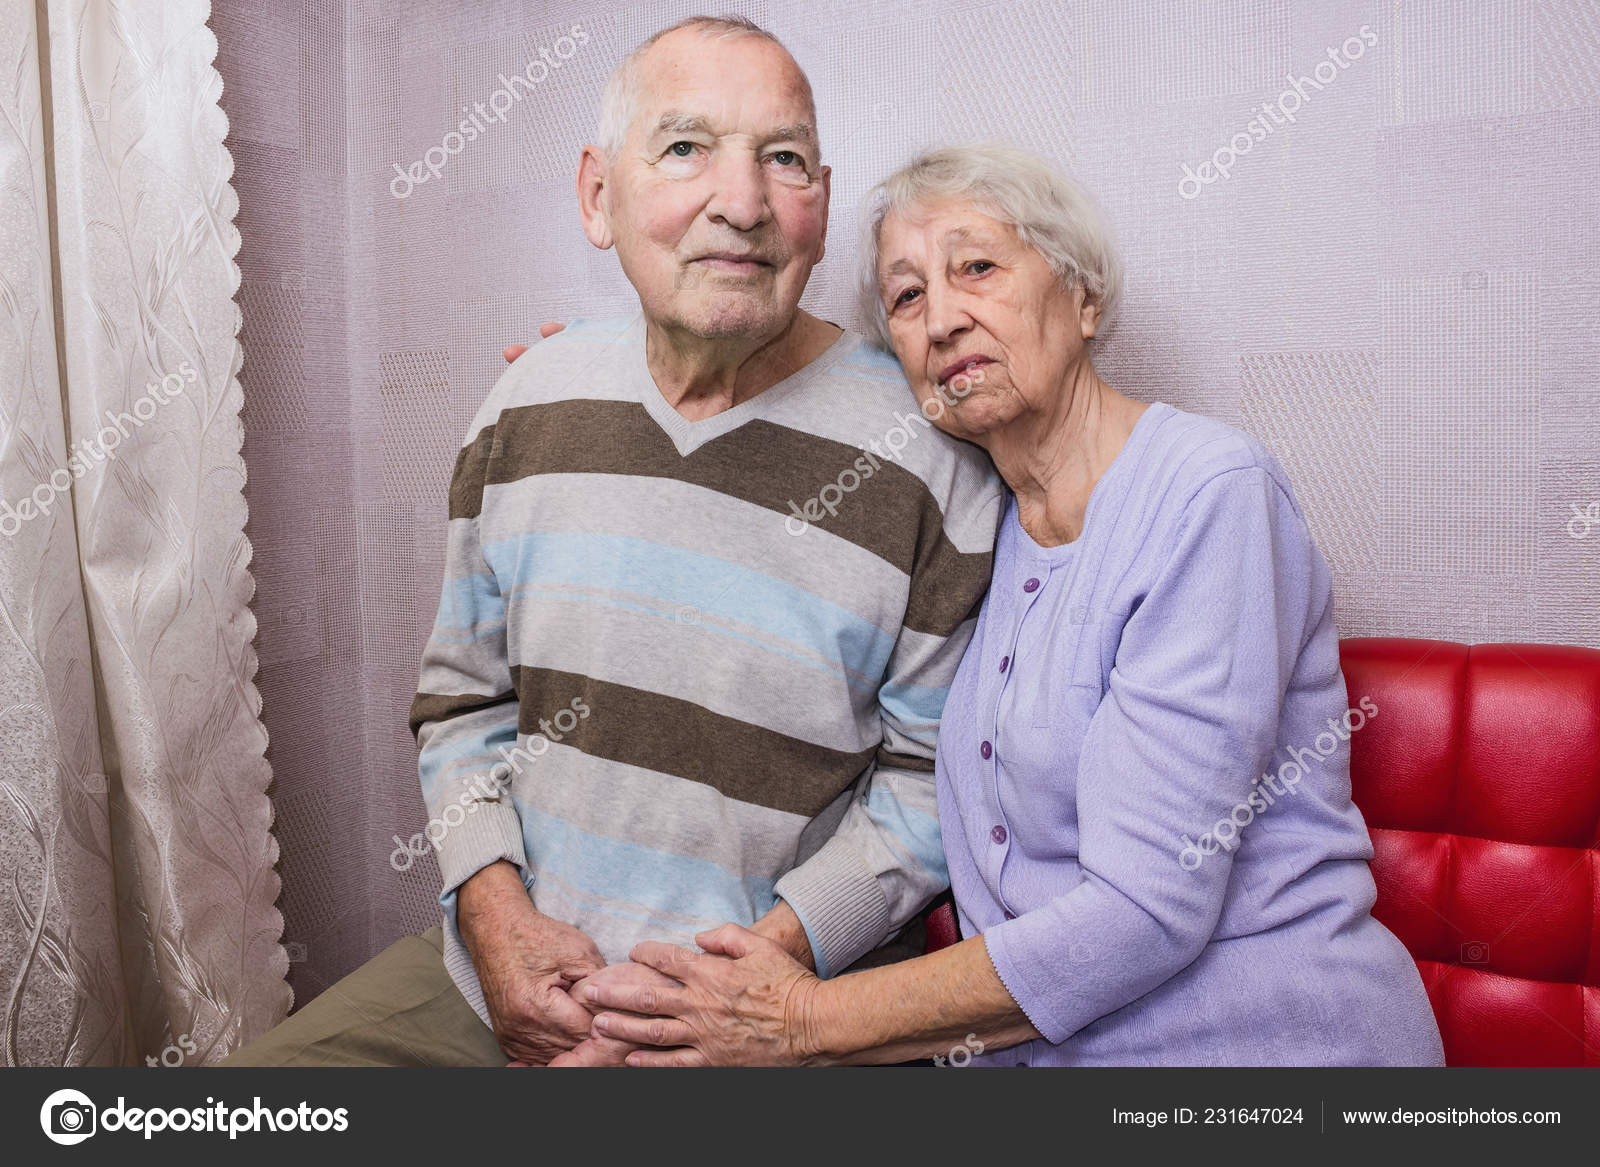 Happy Affectionate Mature Old Man And Woman Embracing Looking At